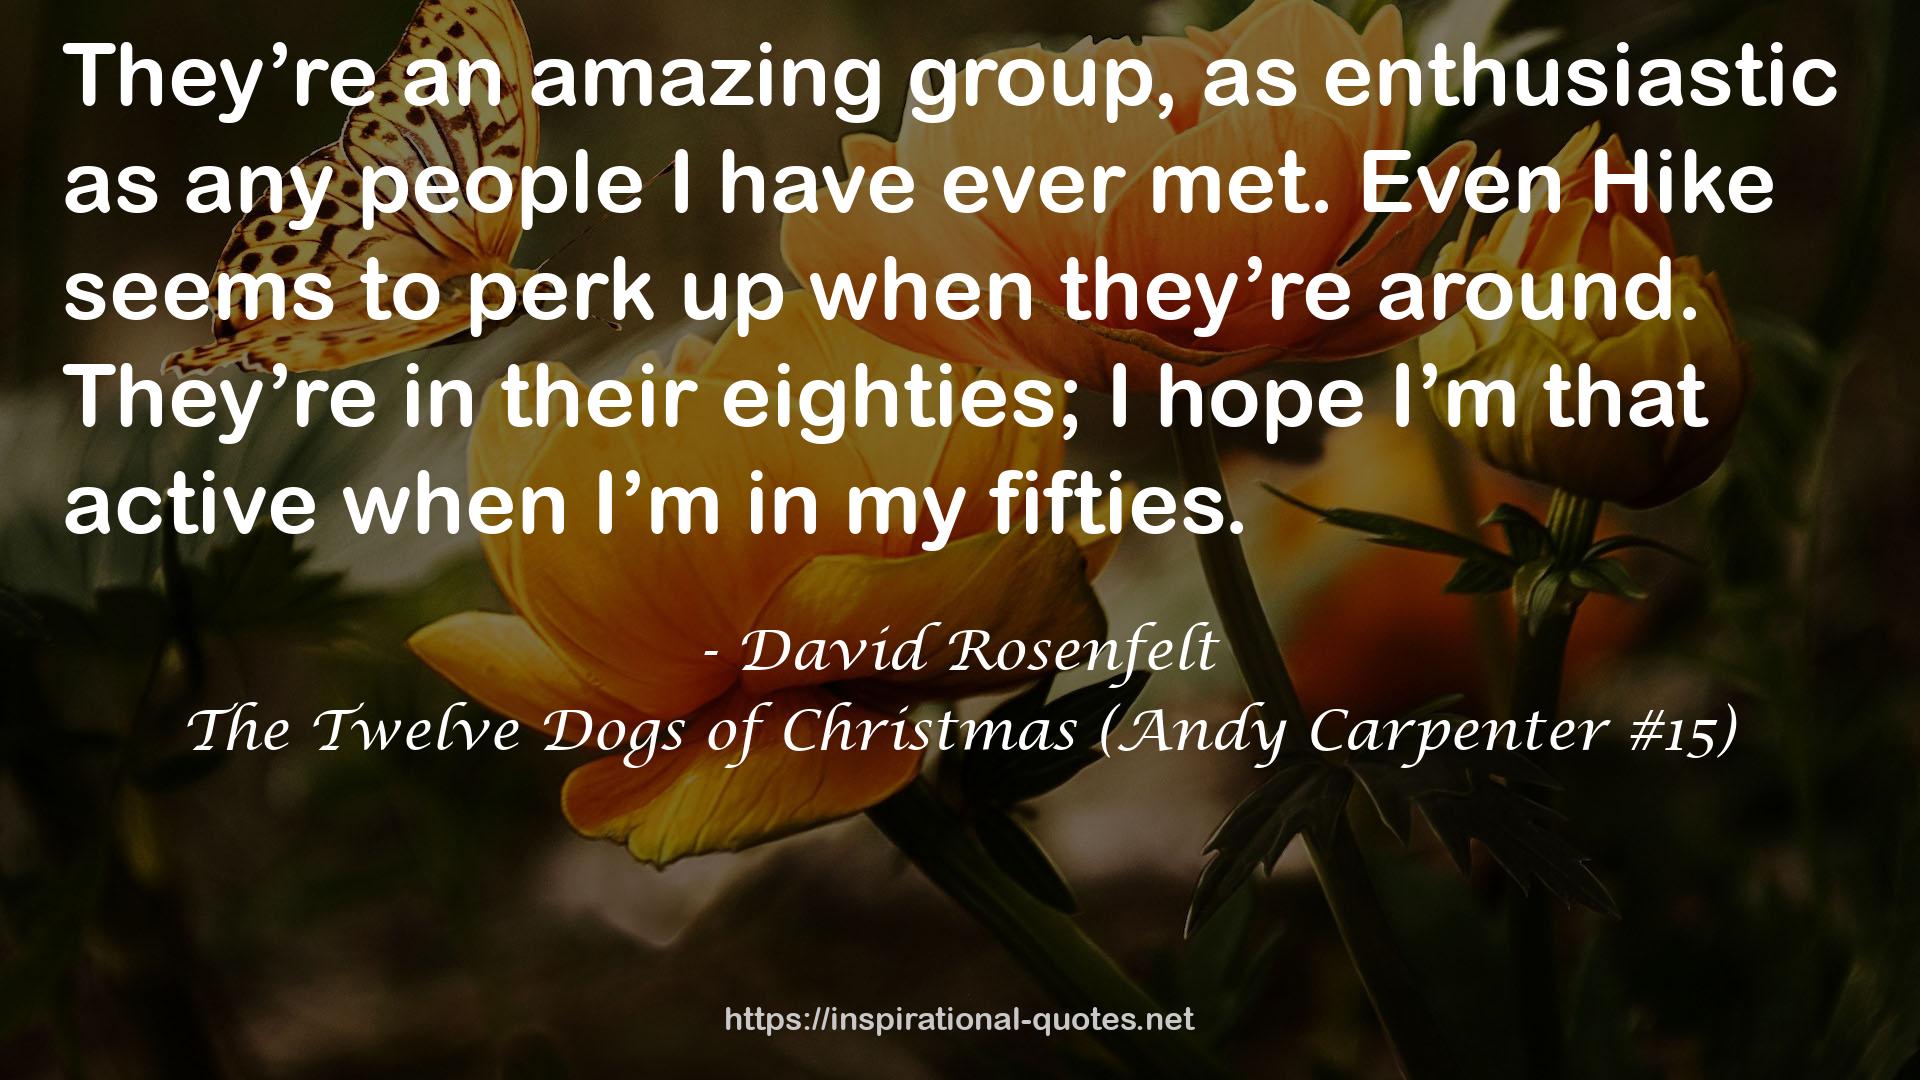 The Twelve Dogs of Christmas (Andy Carpenter #15) QUOTES